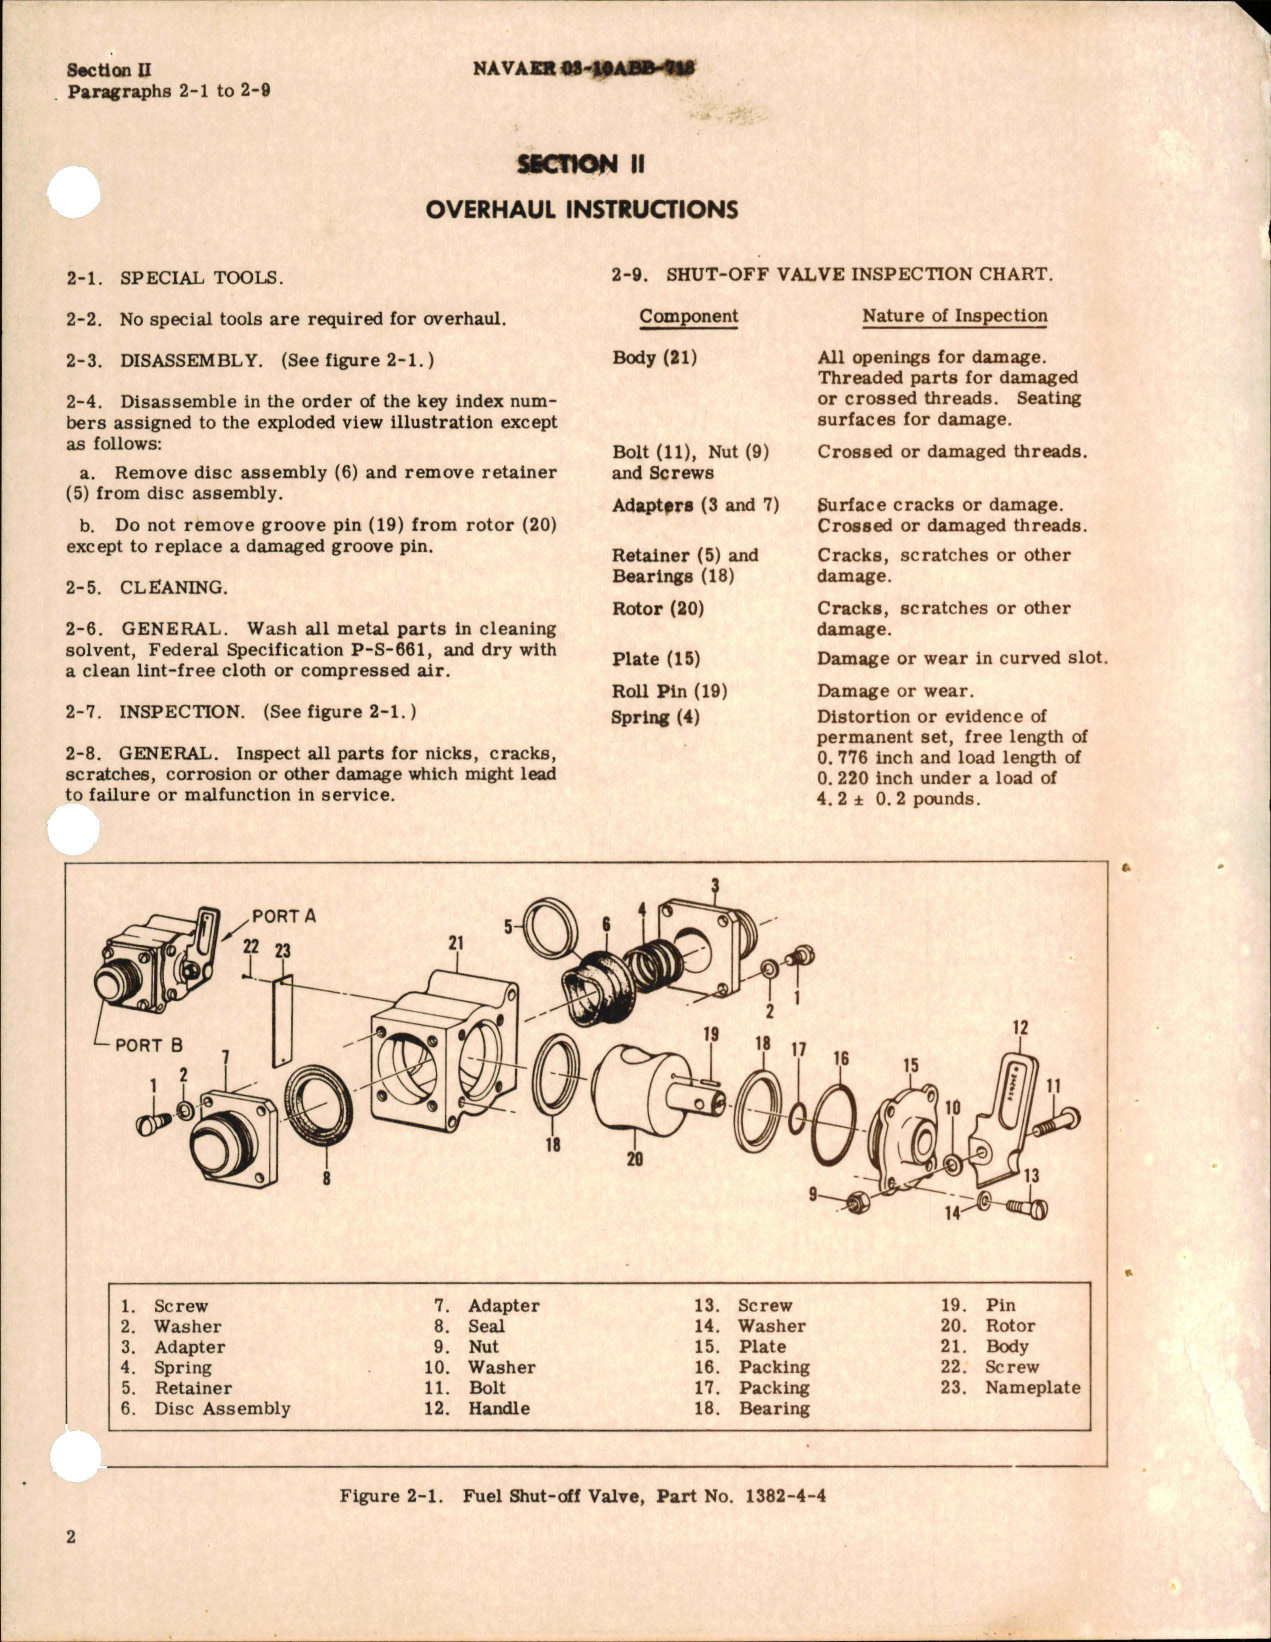 Sample page 5 from AirCorps Library document: Overhaul Instructions for Fuel Shut-Off Valve 